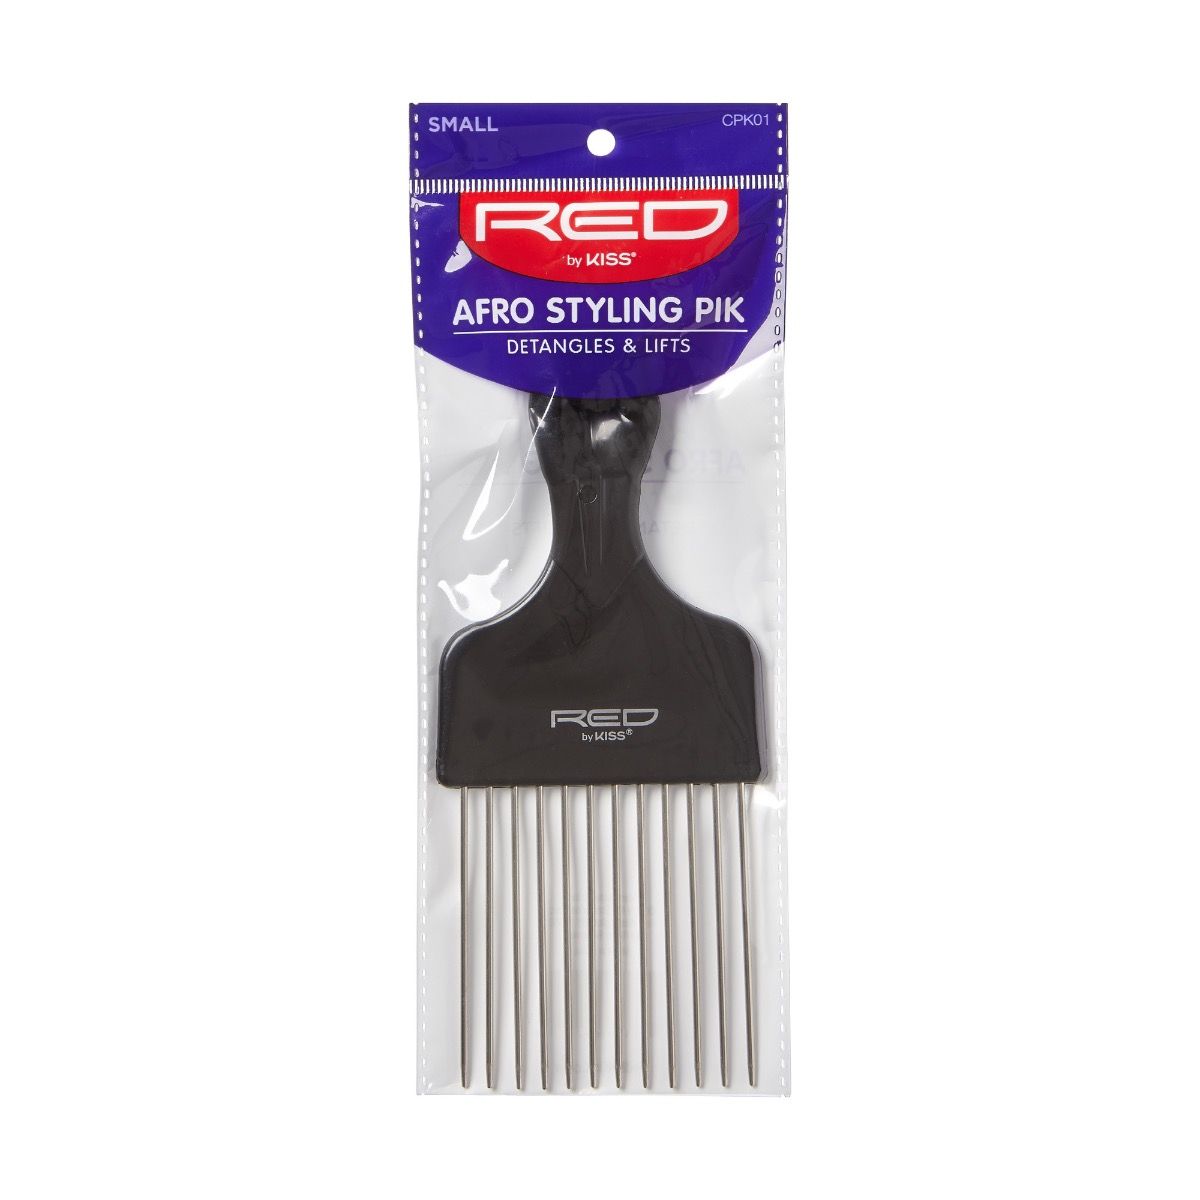 RED PROFESSIONAL AFRO STYLING PIK SMALL